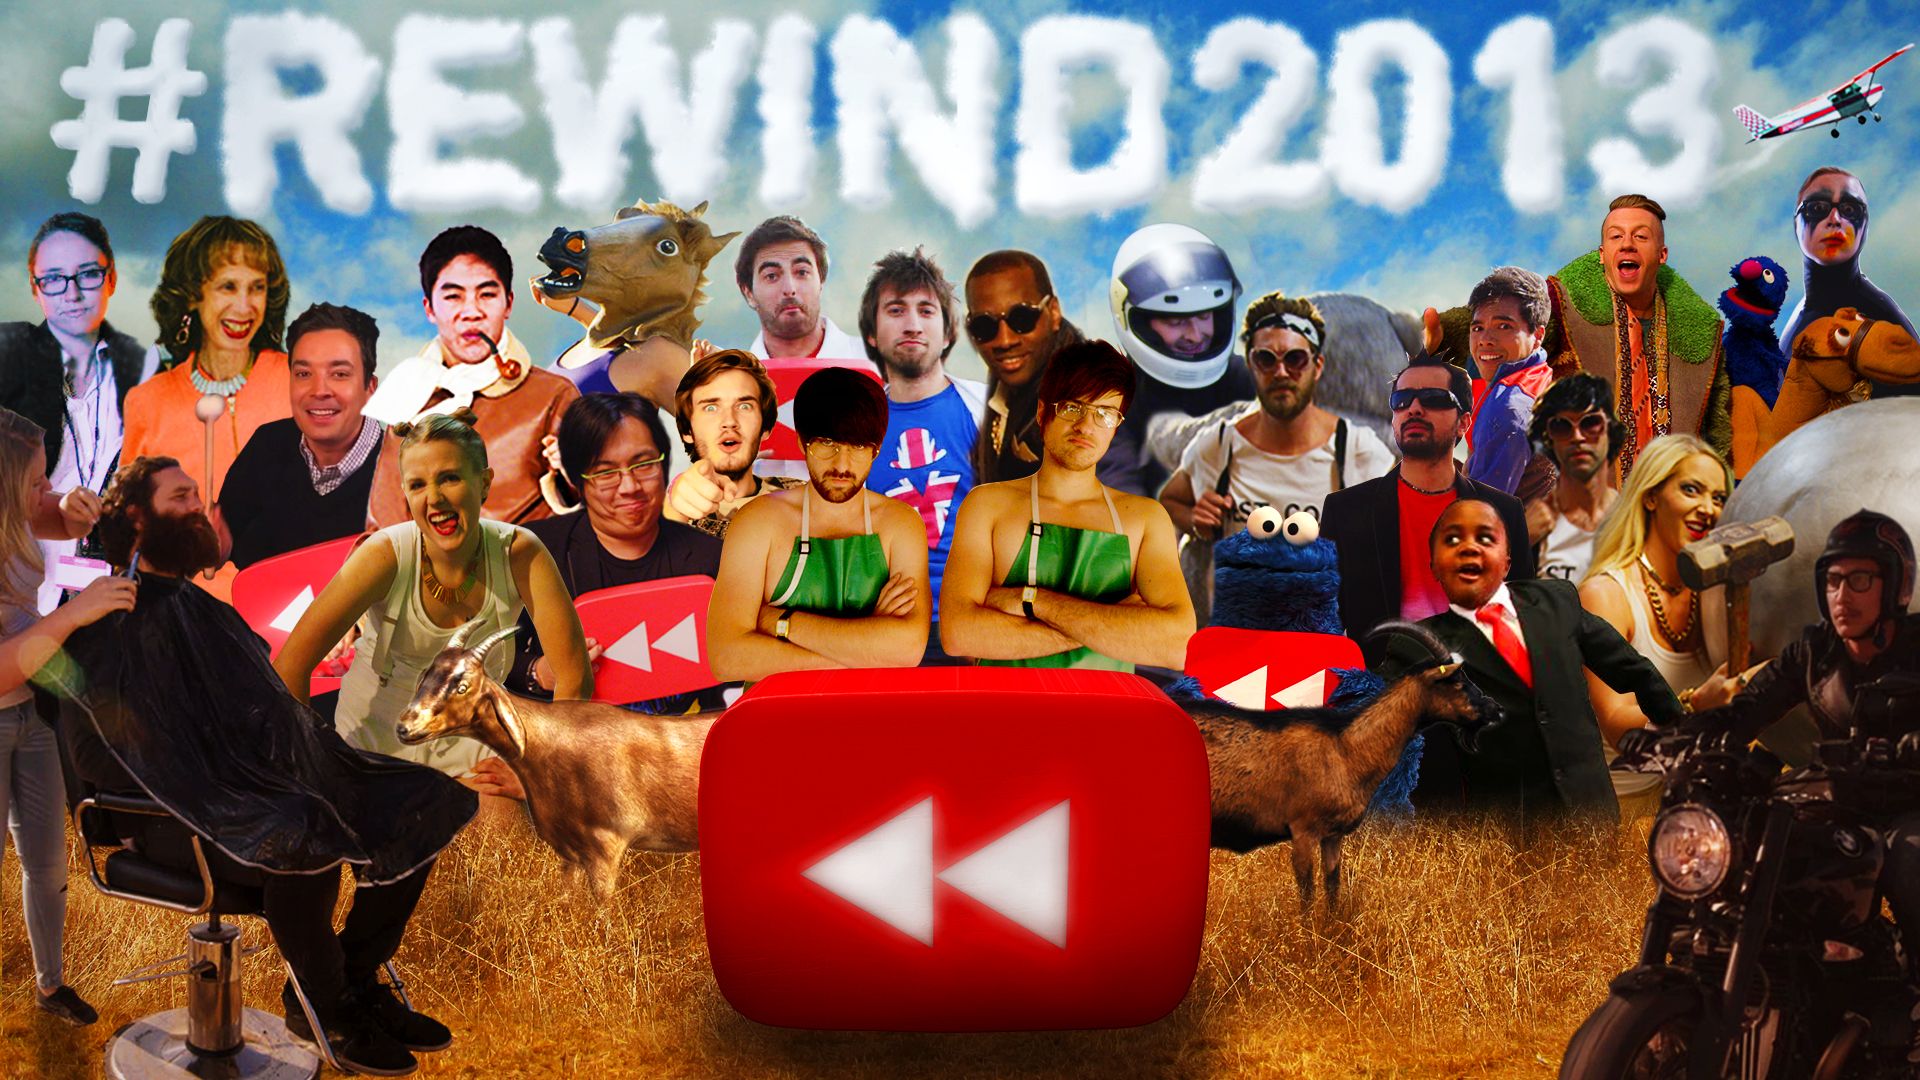 youtube rewind what does 2013 say celebrates the biggest video trends of the year image 1